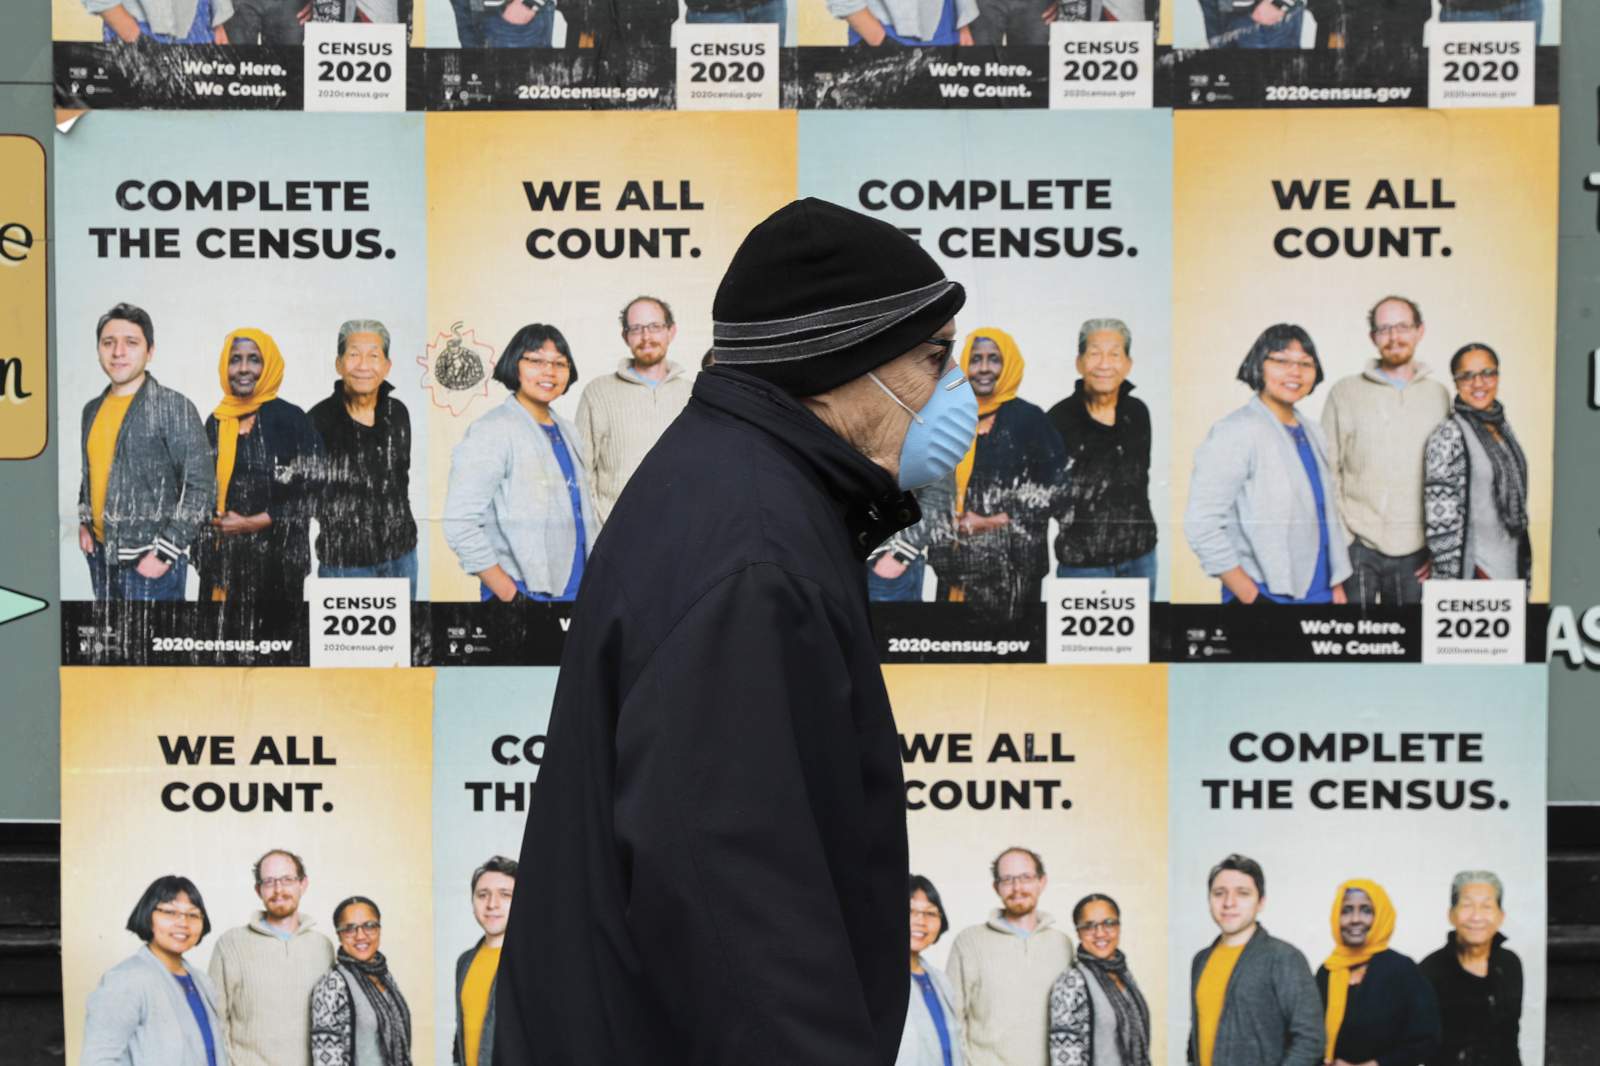 EXPLAINER: What the release of 2020 census numbers means